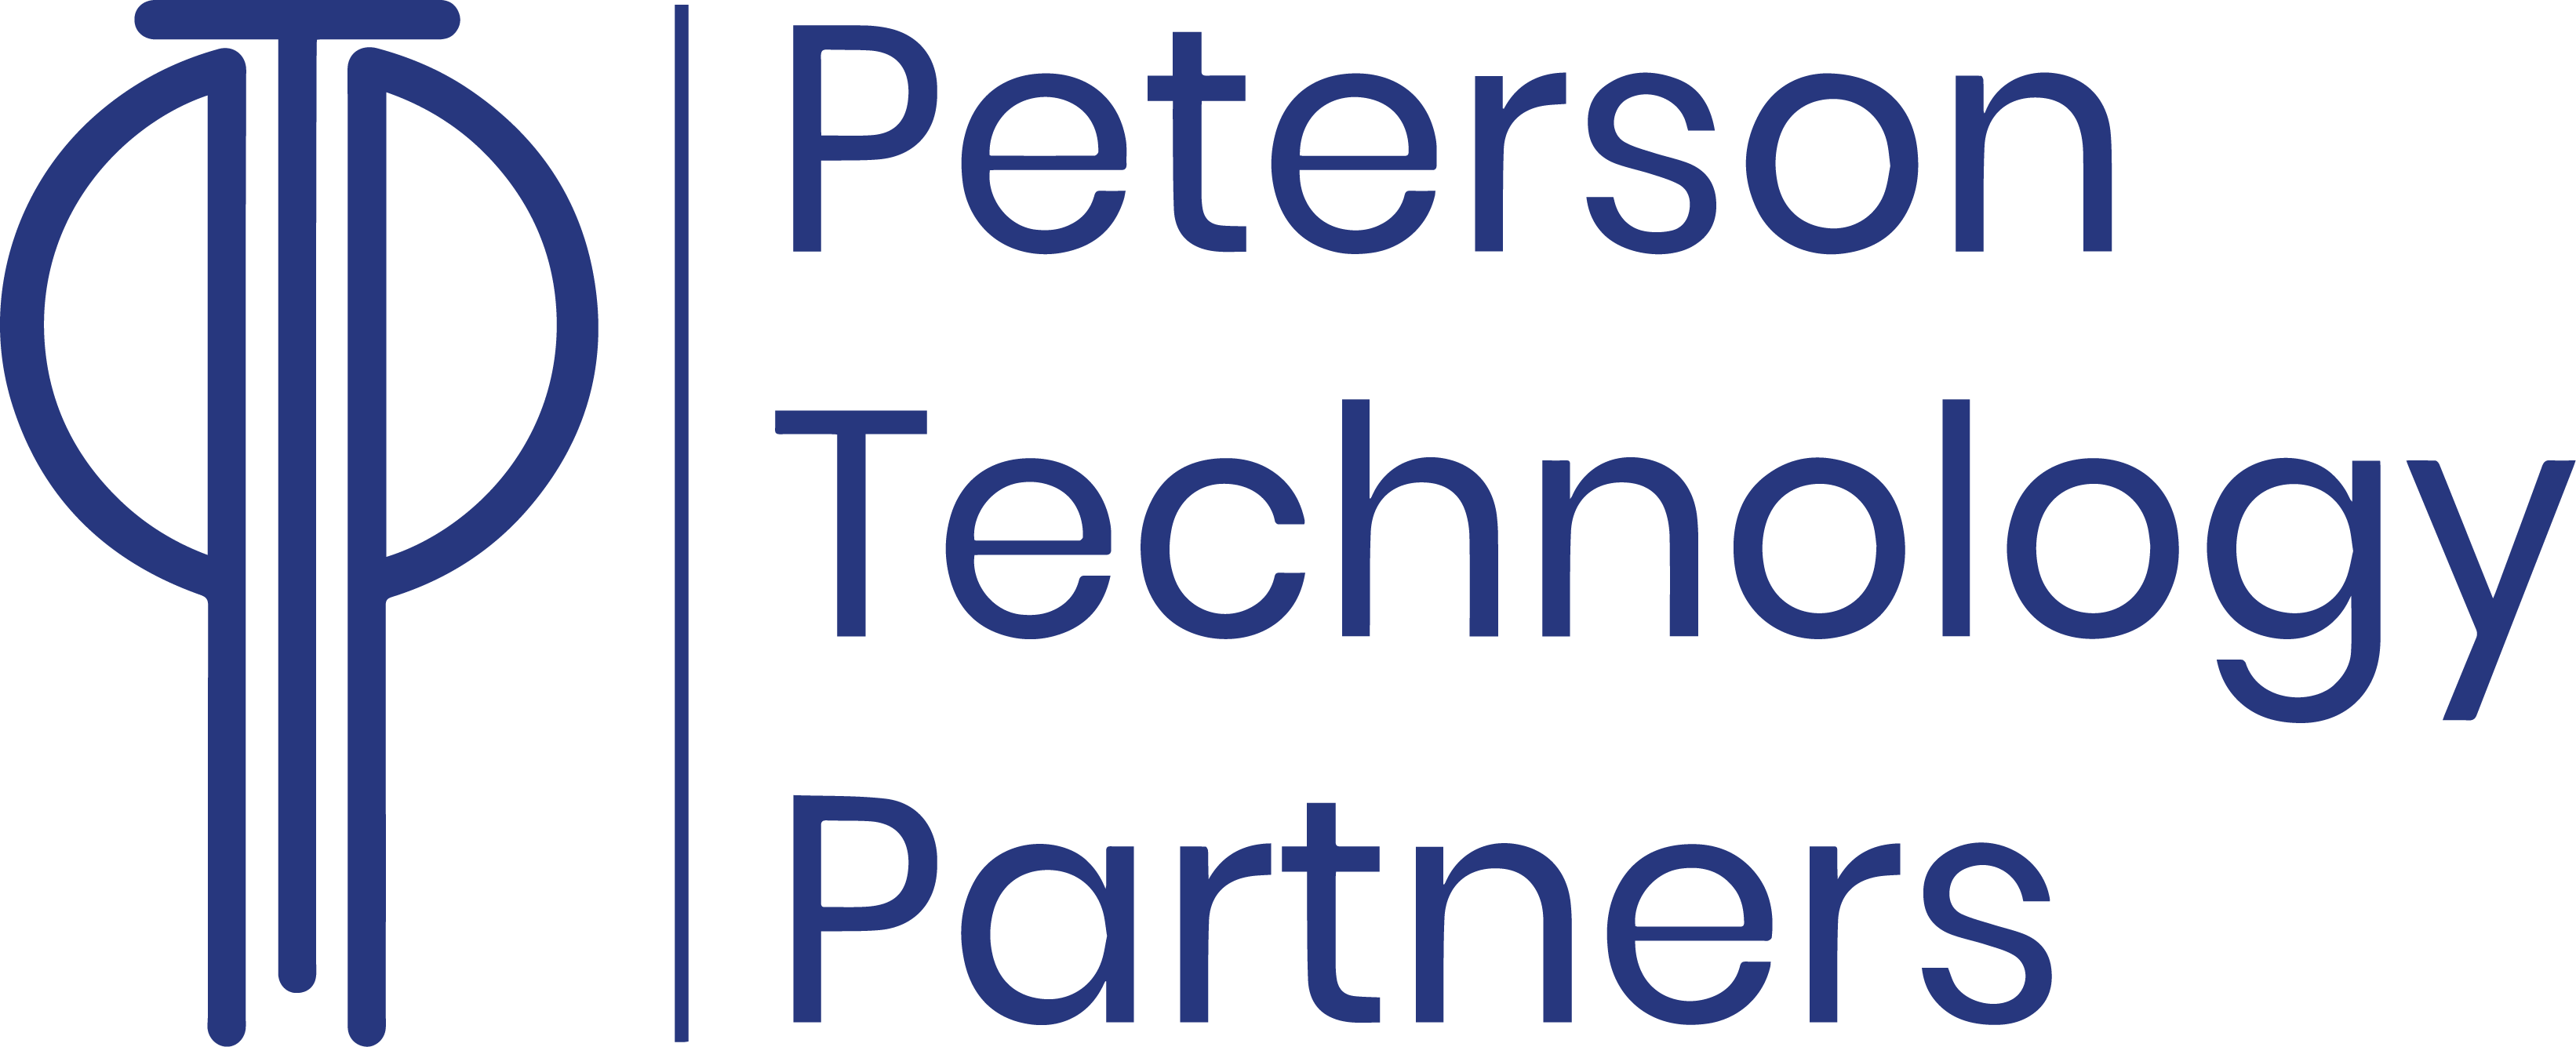 Peterson Technology Partners - 25 years experience IT Staffing Company